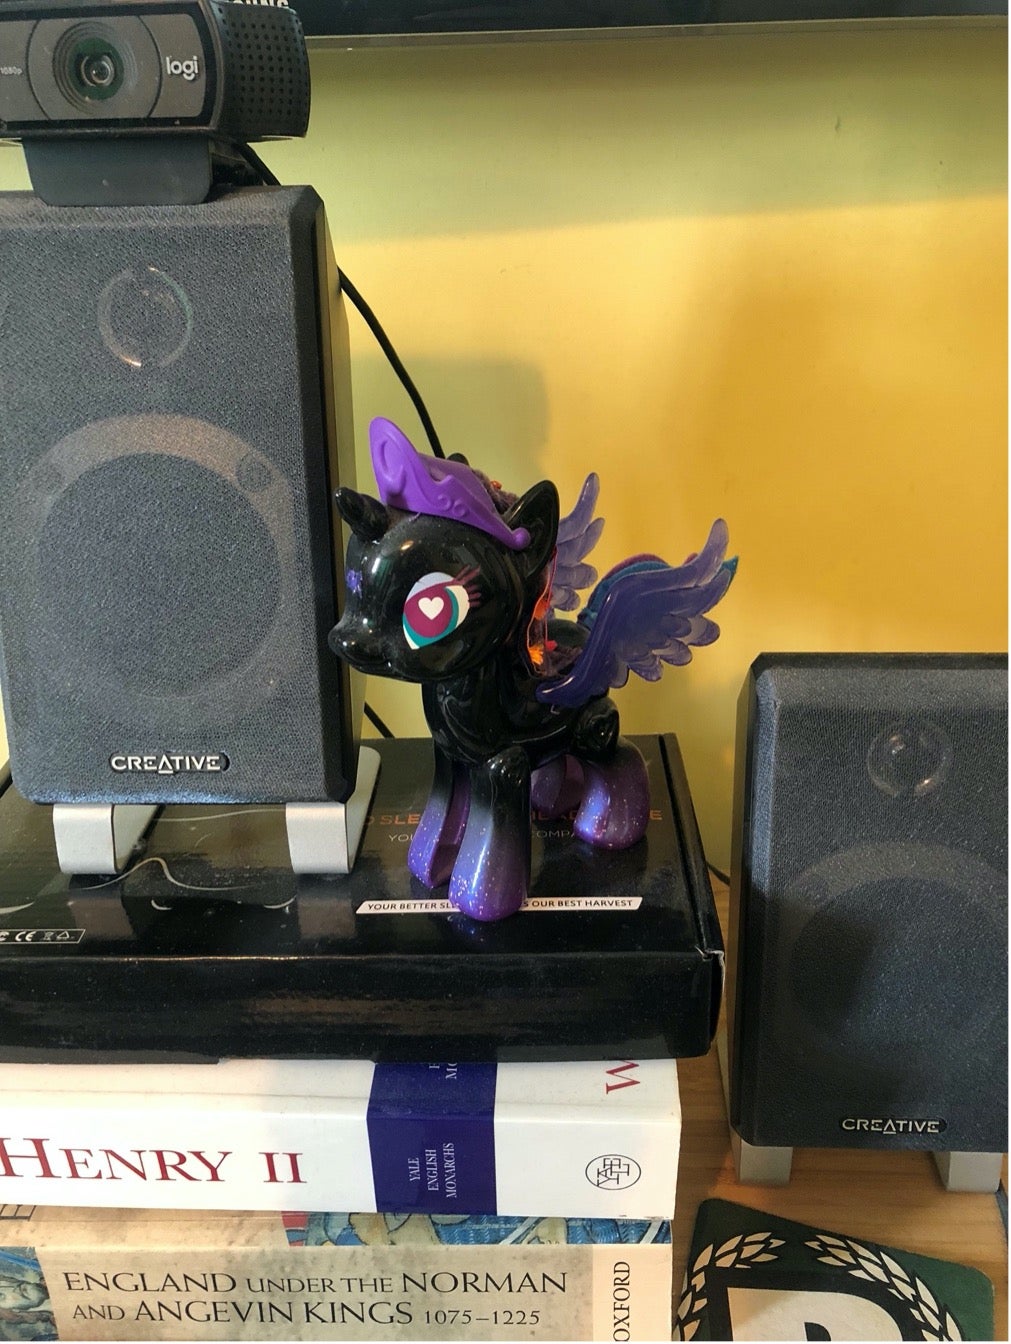 A small figurine of a black and purple unicorn sitting on top of a pile of books